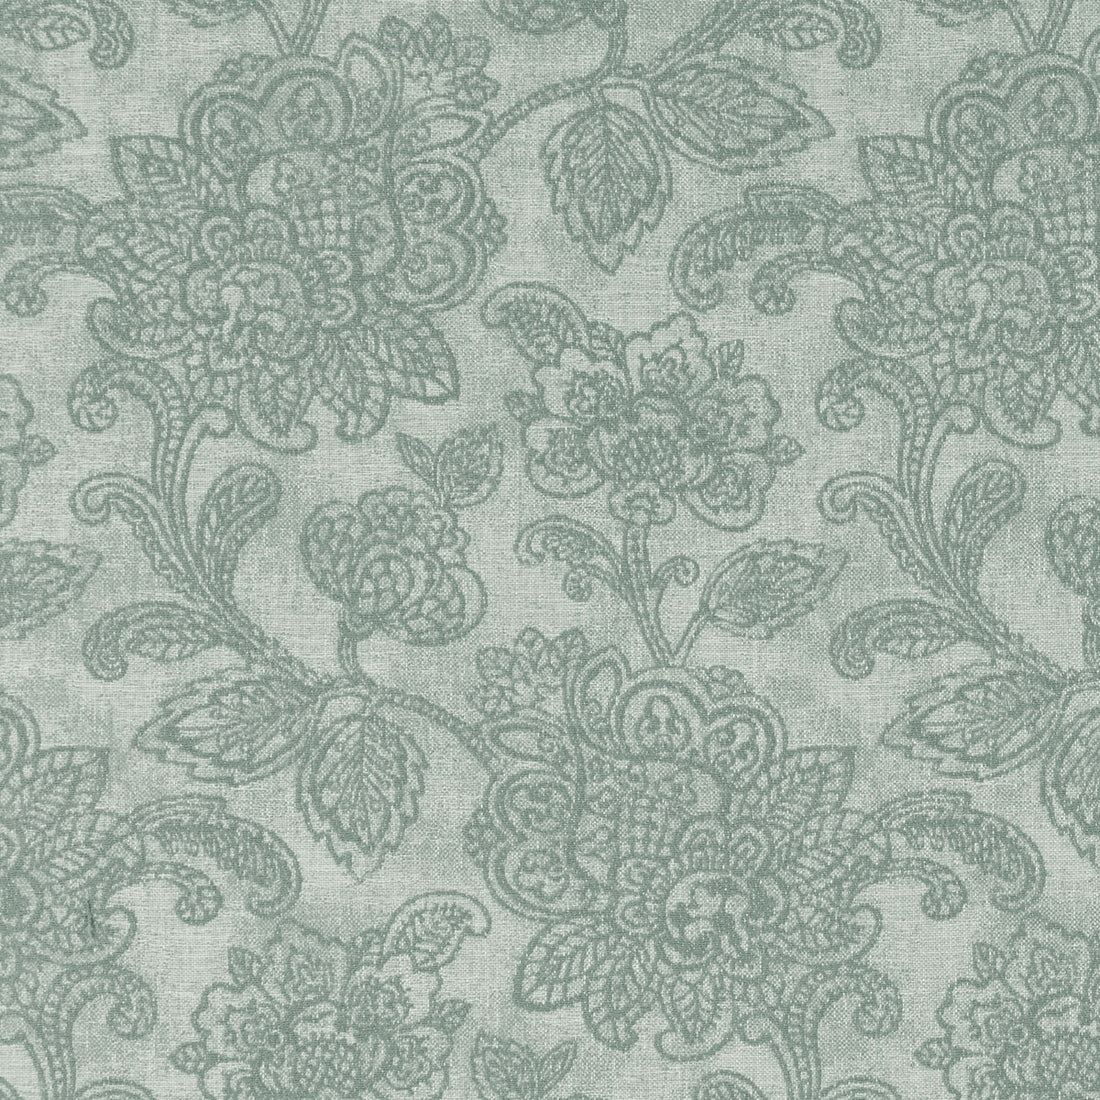 Cranbrook fabric in eau de nil color - pattern F1044/03.CAC.0 - by Clarke And Clarke in the Clarke &amp; Clarke Castle Garden collection